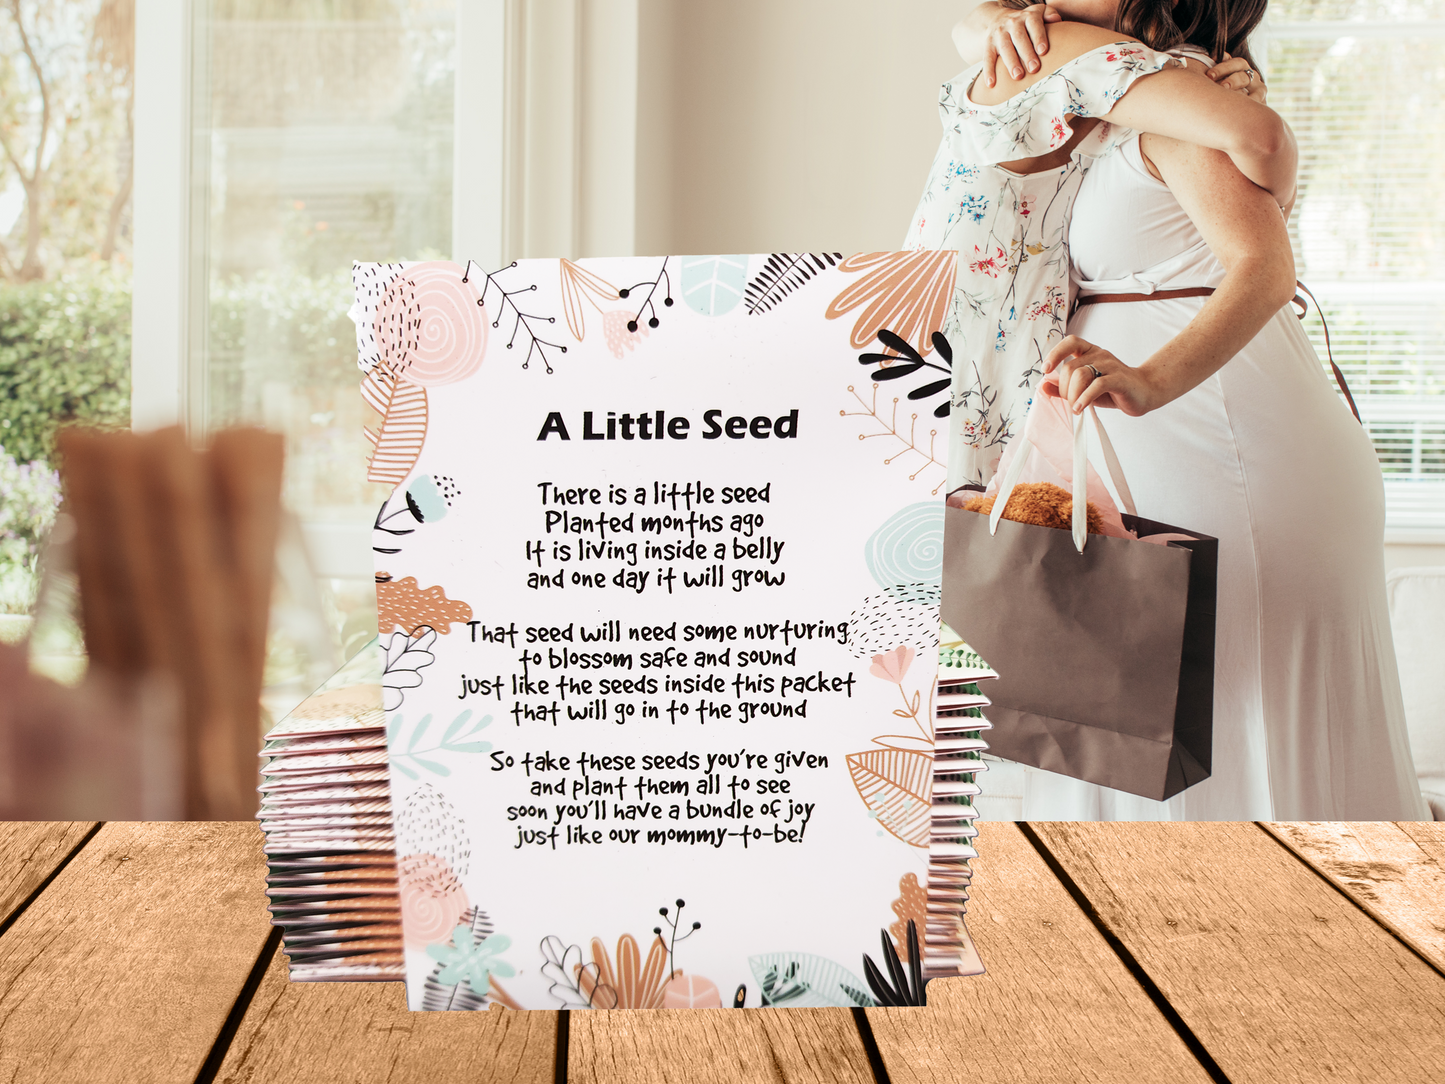 Woodland Dusty Rose | Girl Baby Shower Favors for Guests | 20 Wildflower Seeds Packets | Pre-Filled | Bouquet Wildflower Mix | Non-GMO Seeds | Gender Neutral | Oh Baby | Gifts